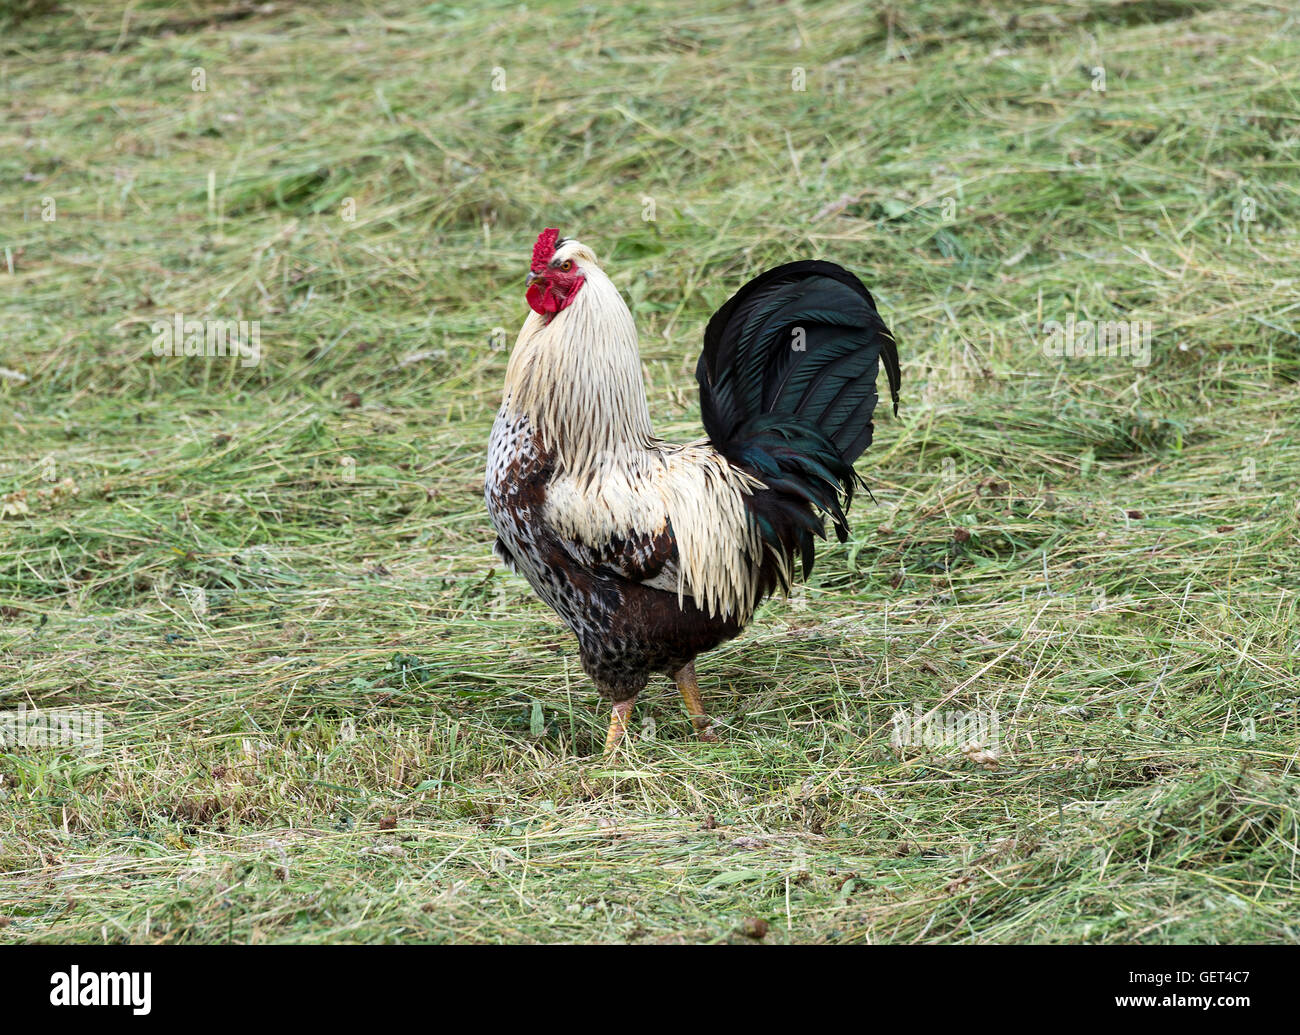 A Handsome Black and White Speckled Cockerel with Red Crop and Crown in a Field at Kettlewell Yorkshire Dales England United Kingdom UK Stock Photo